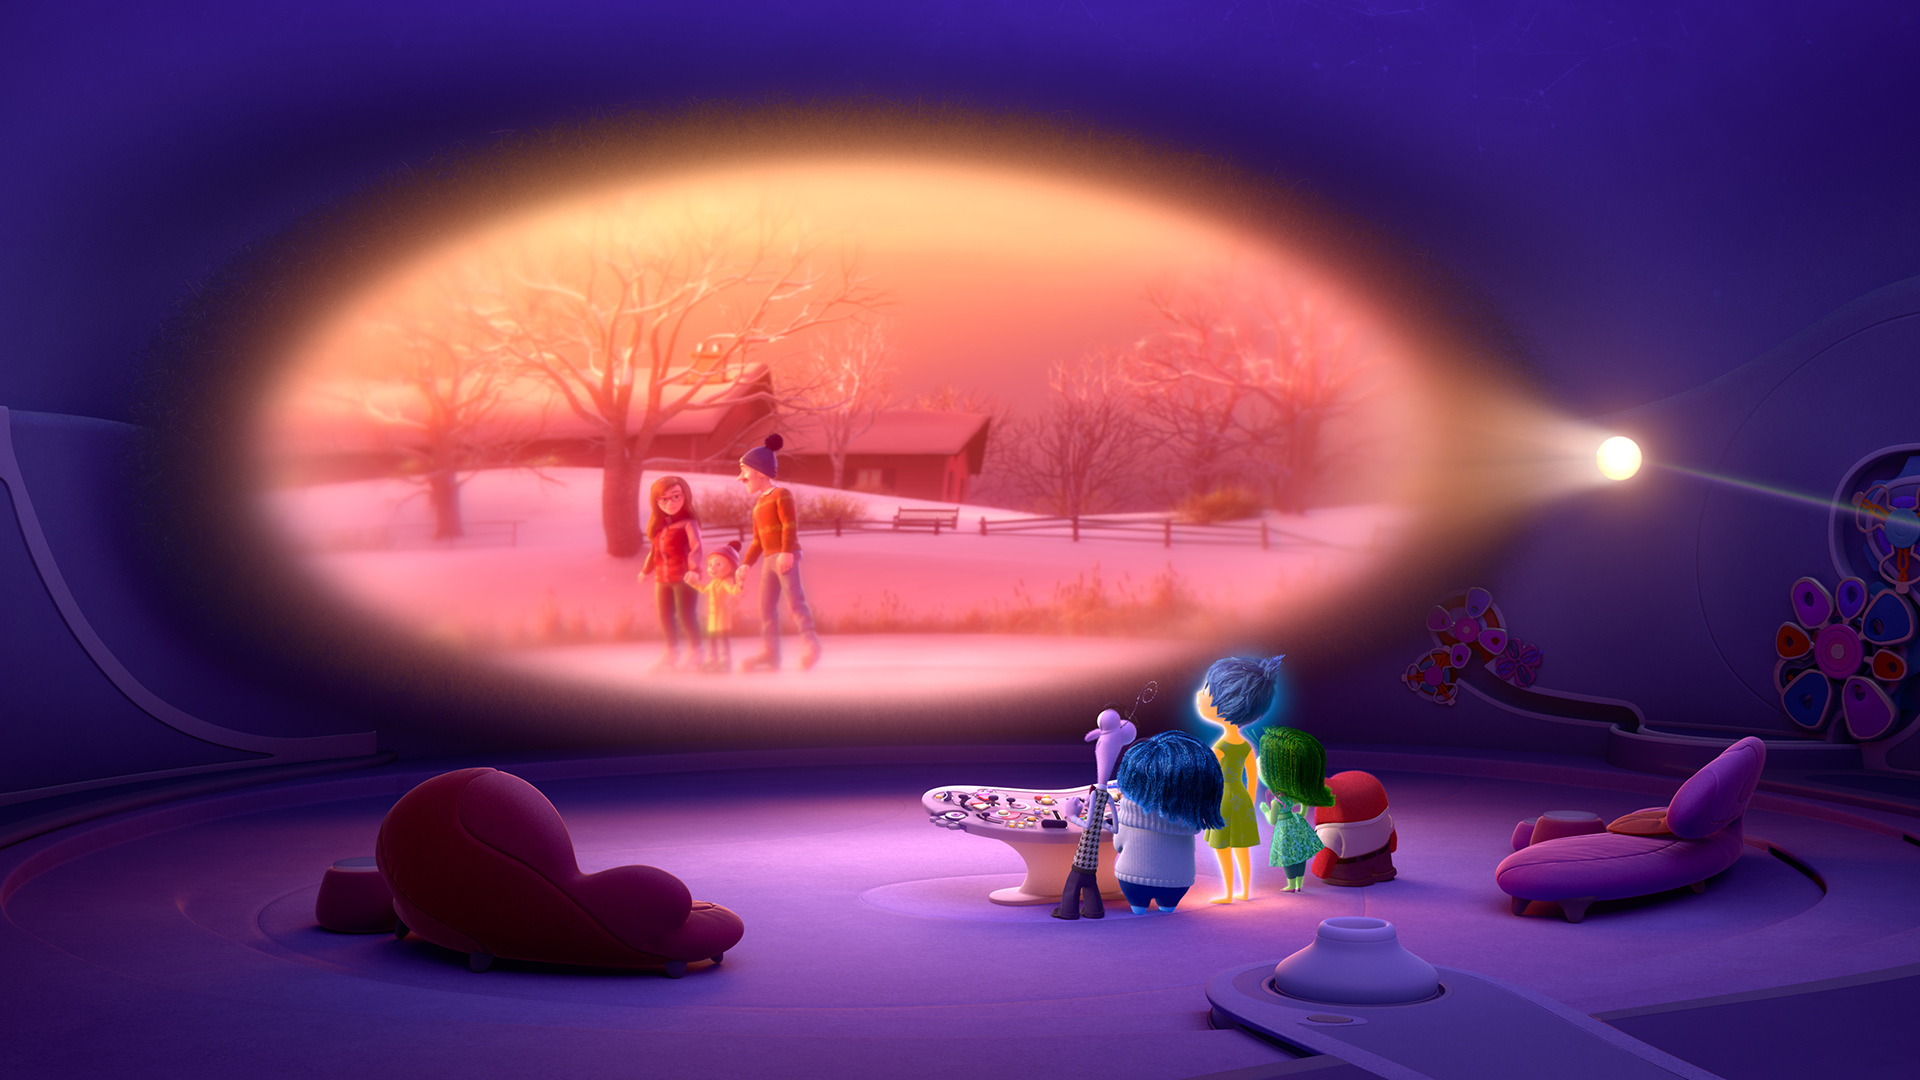 image source: Official Inside Out Movie site